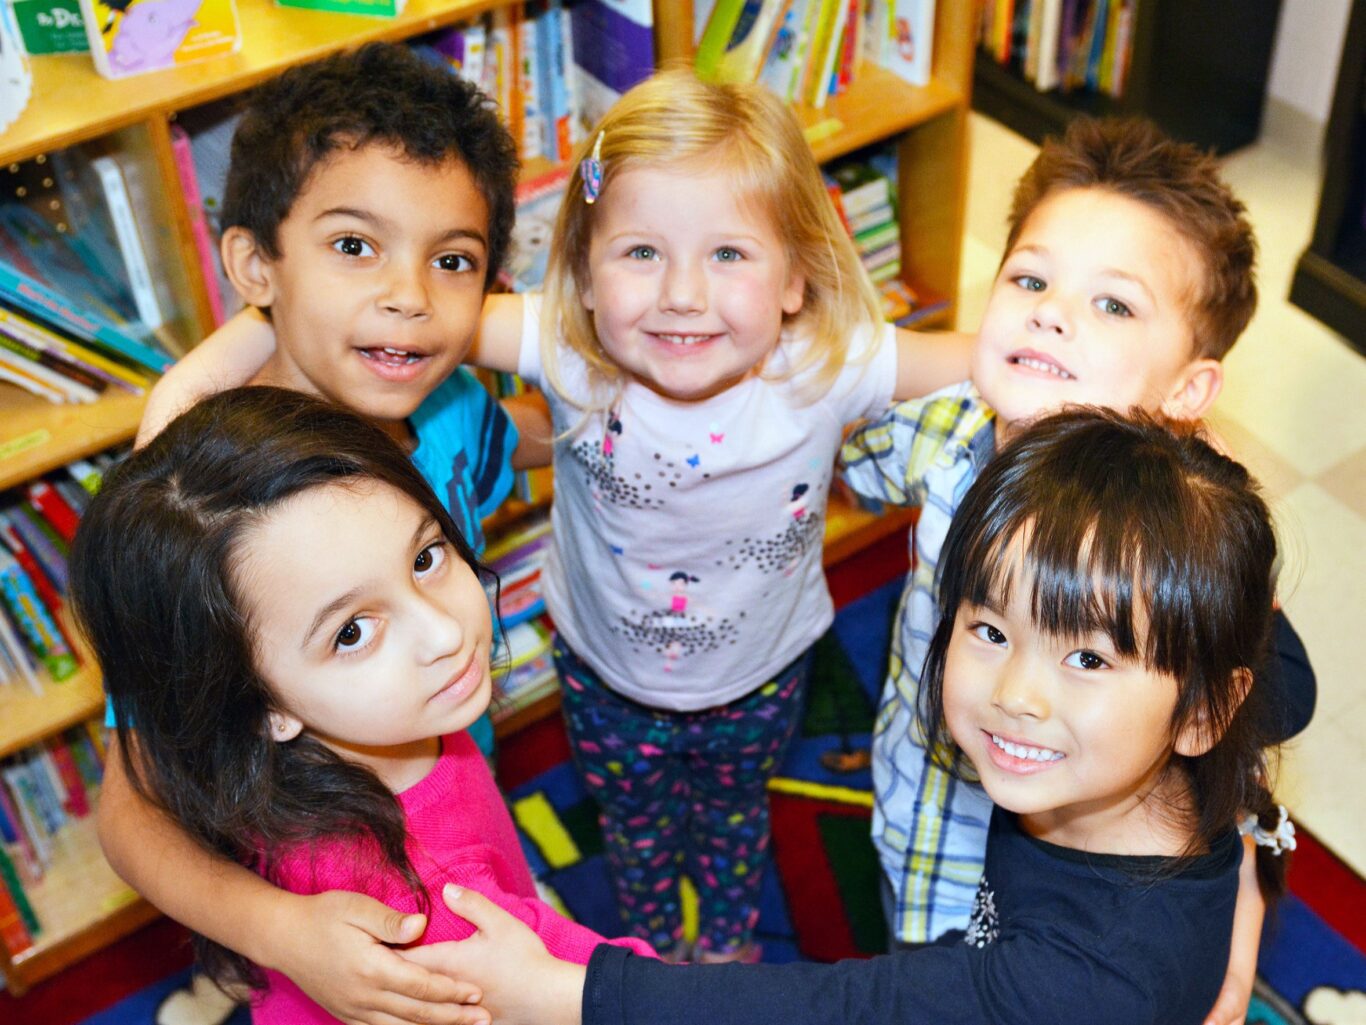 A group of children posing for a picture in a library, captured for the purpose of keywords and SEO optimization.